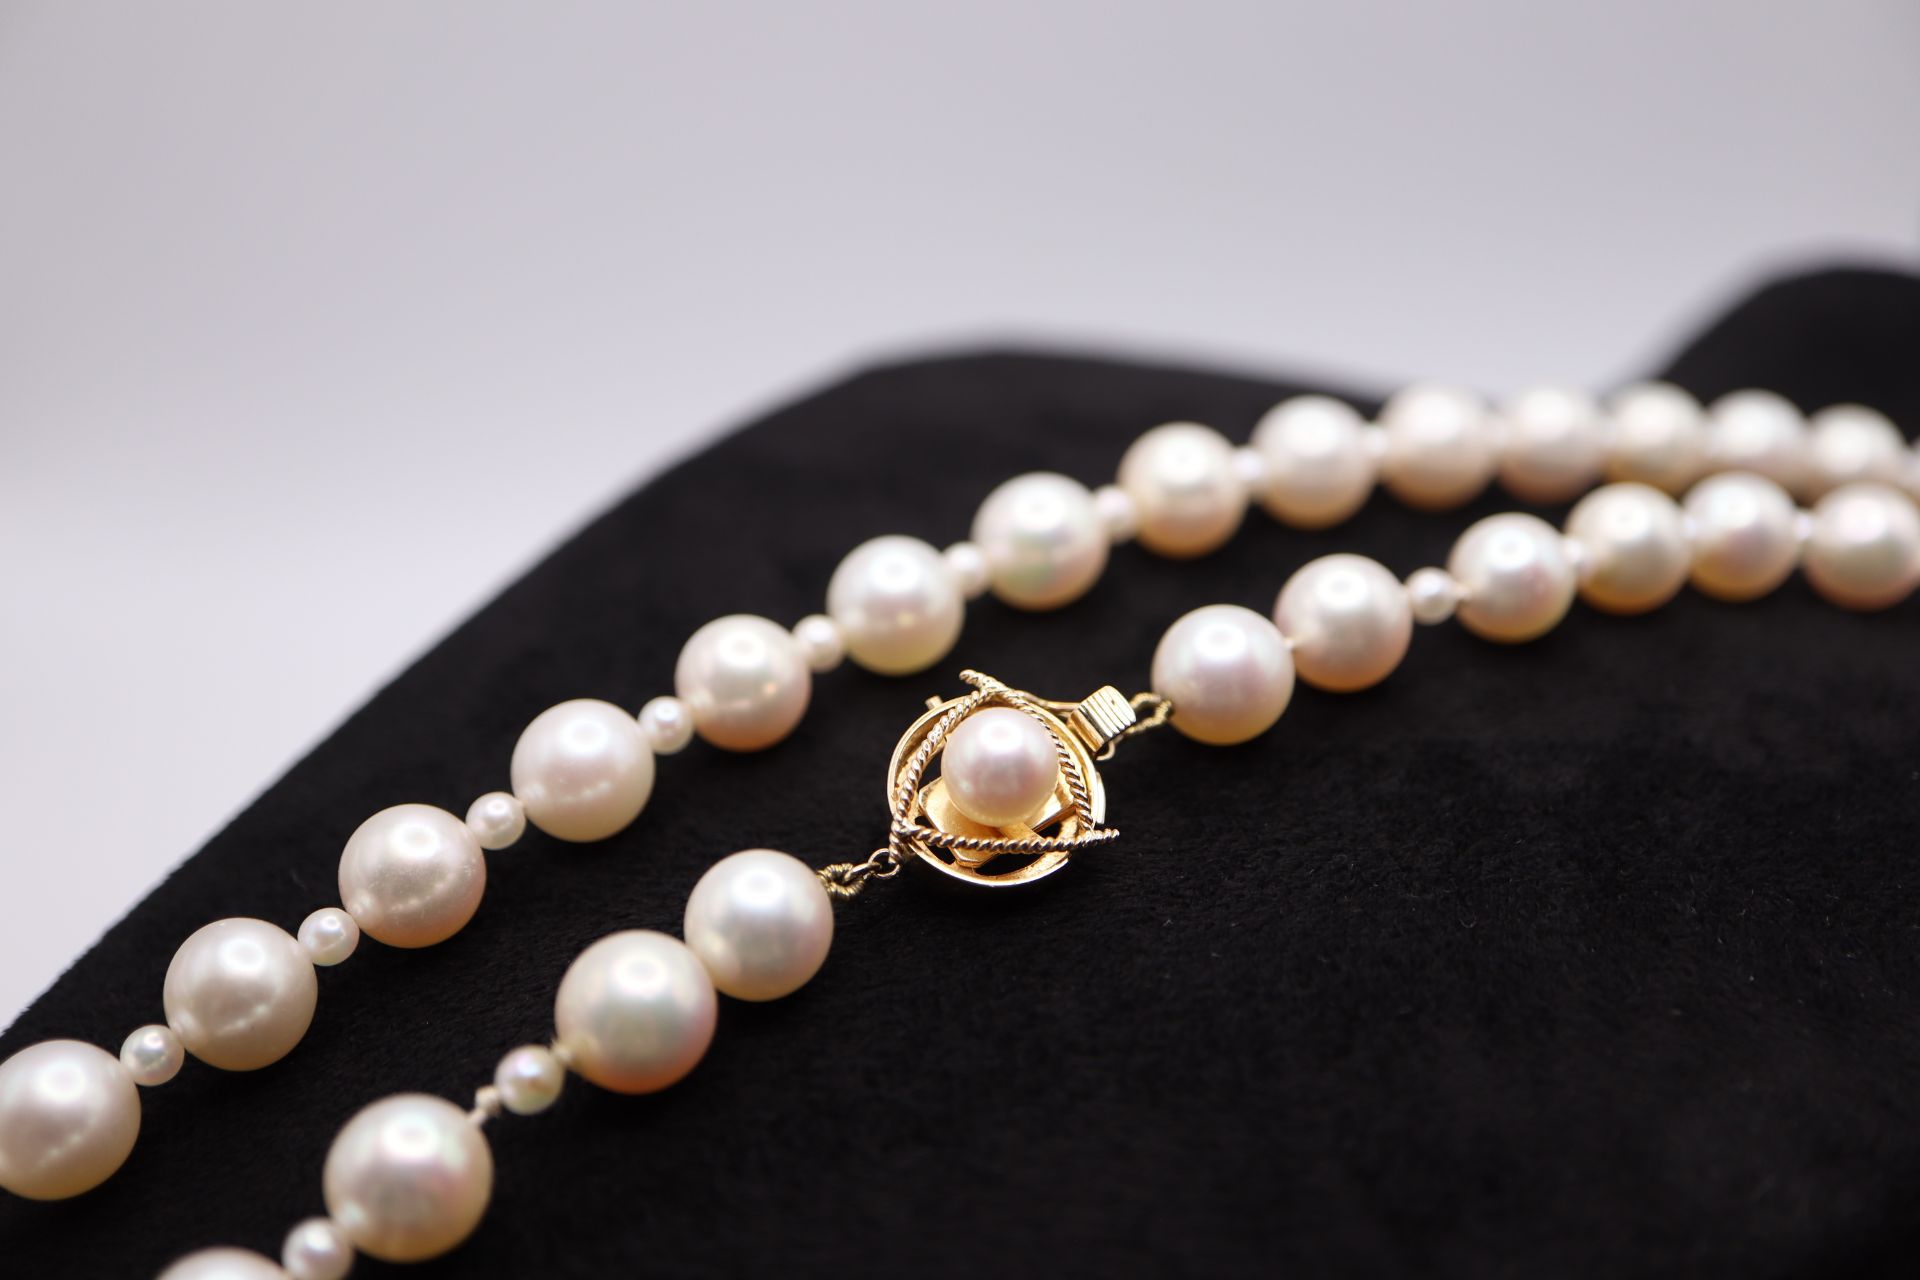 14K YELLOW GOLD & PEARL NECKLACE - Image 3 of 5